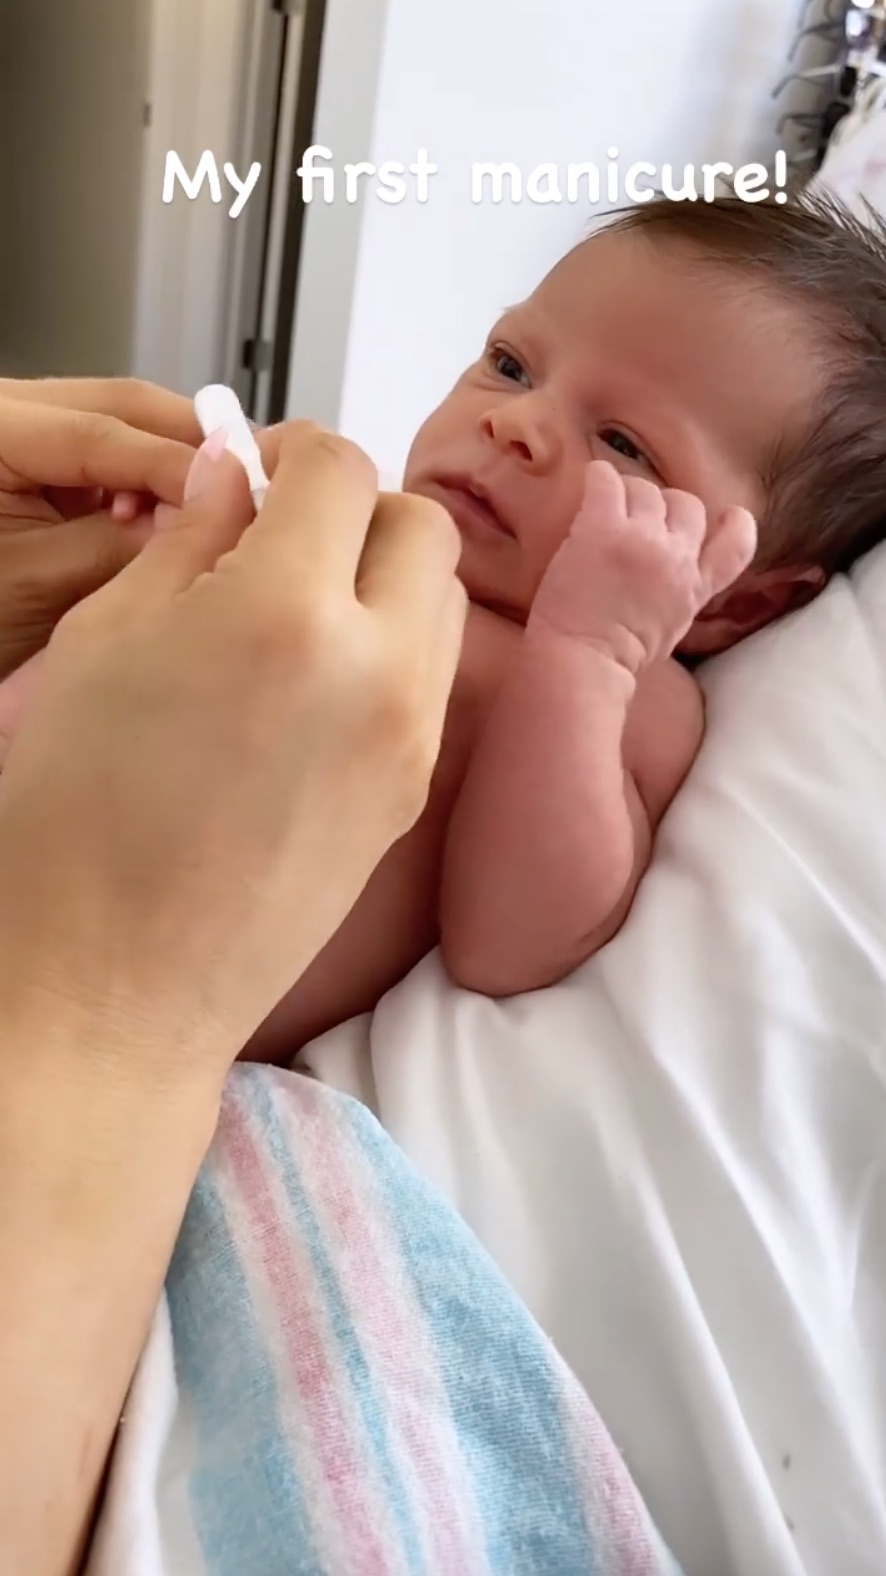 See Scheana Shay Giving Her Daughter Summer Her '1st Manicure'